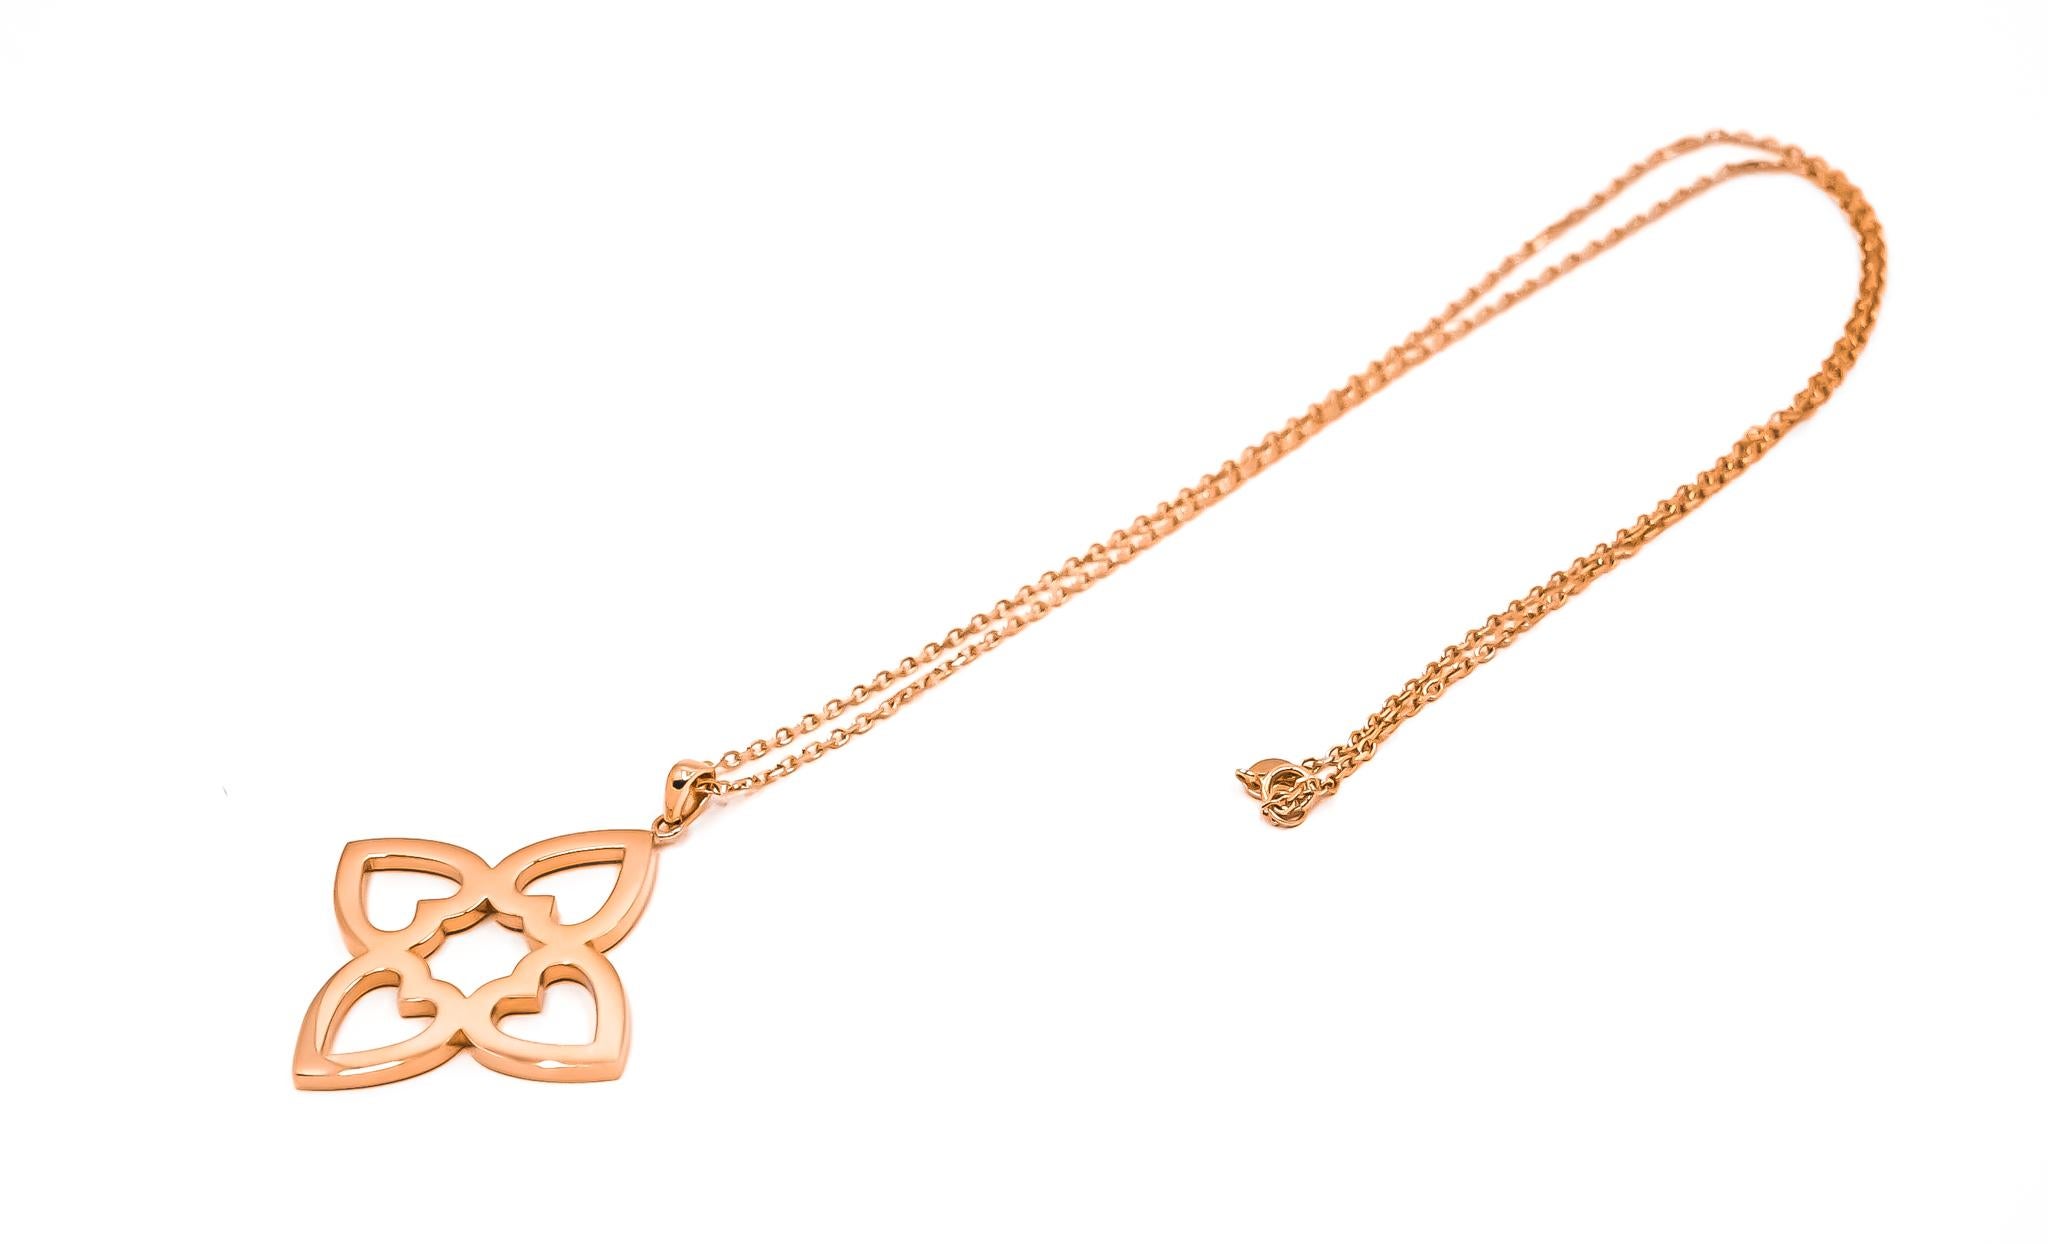 Romantic Connected Hearts Pendant Necklace in 18kt Rose Gold For Sale